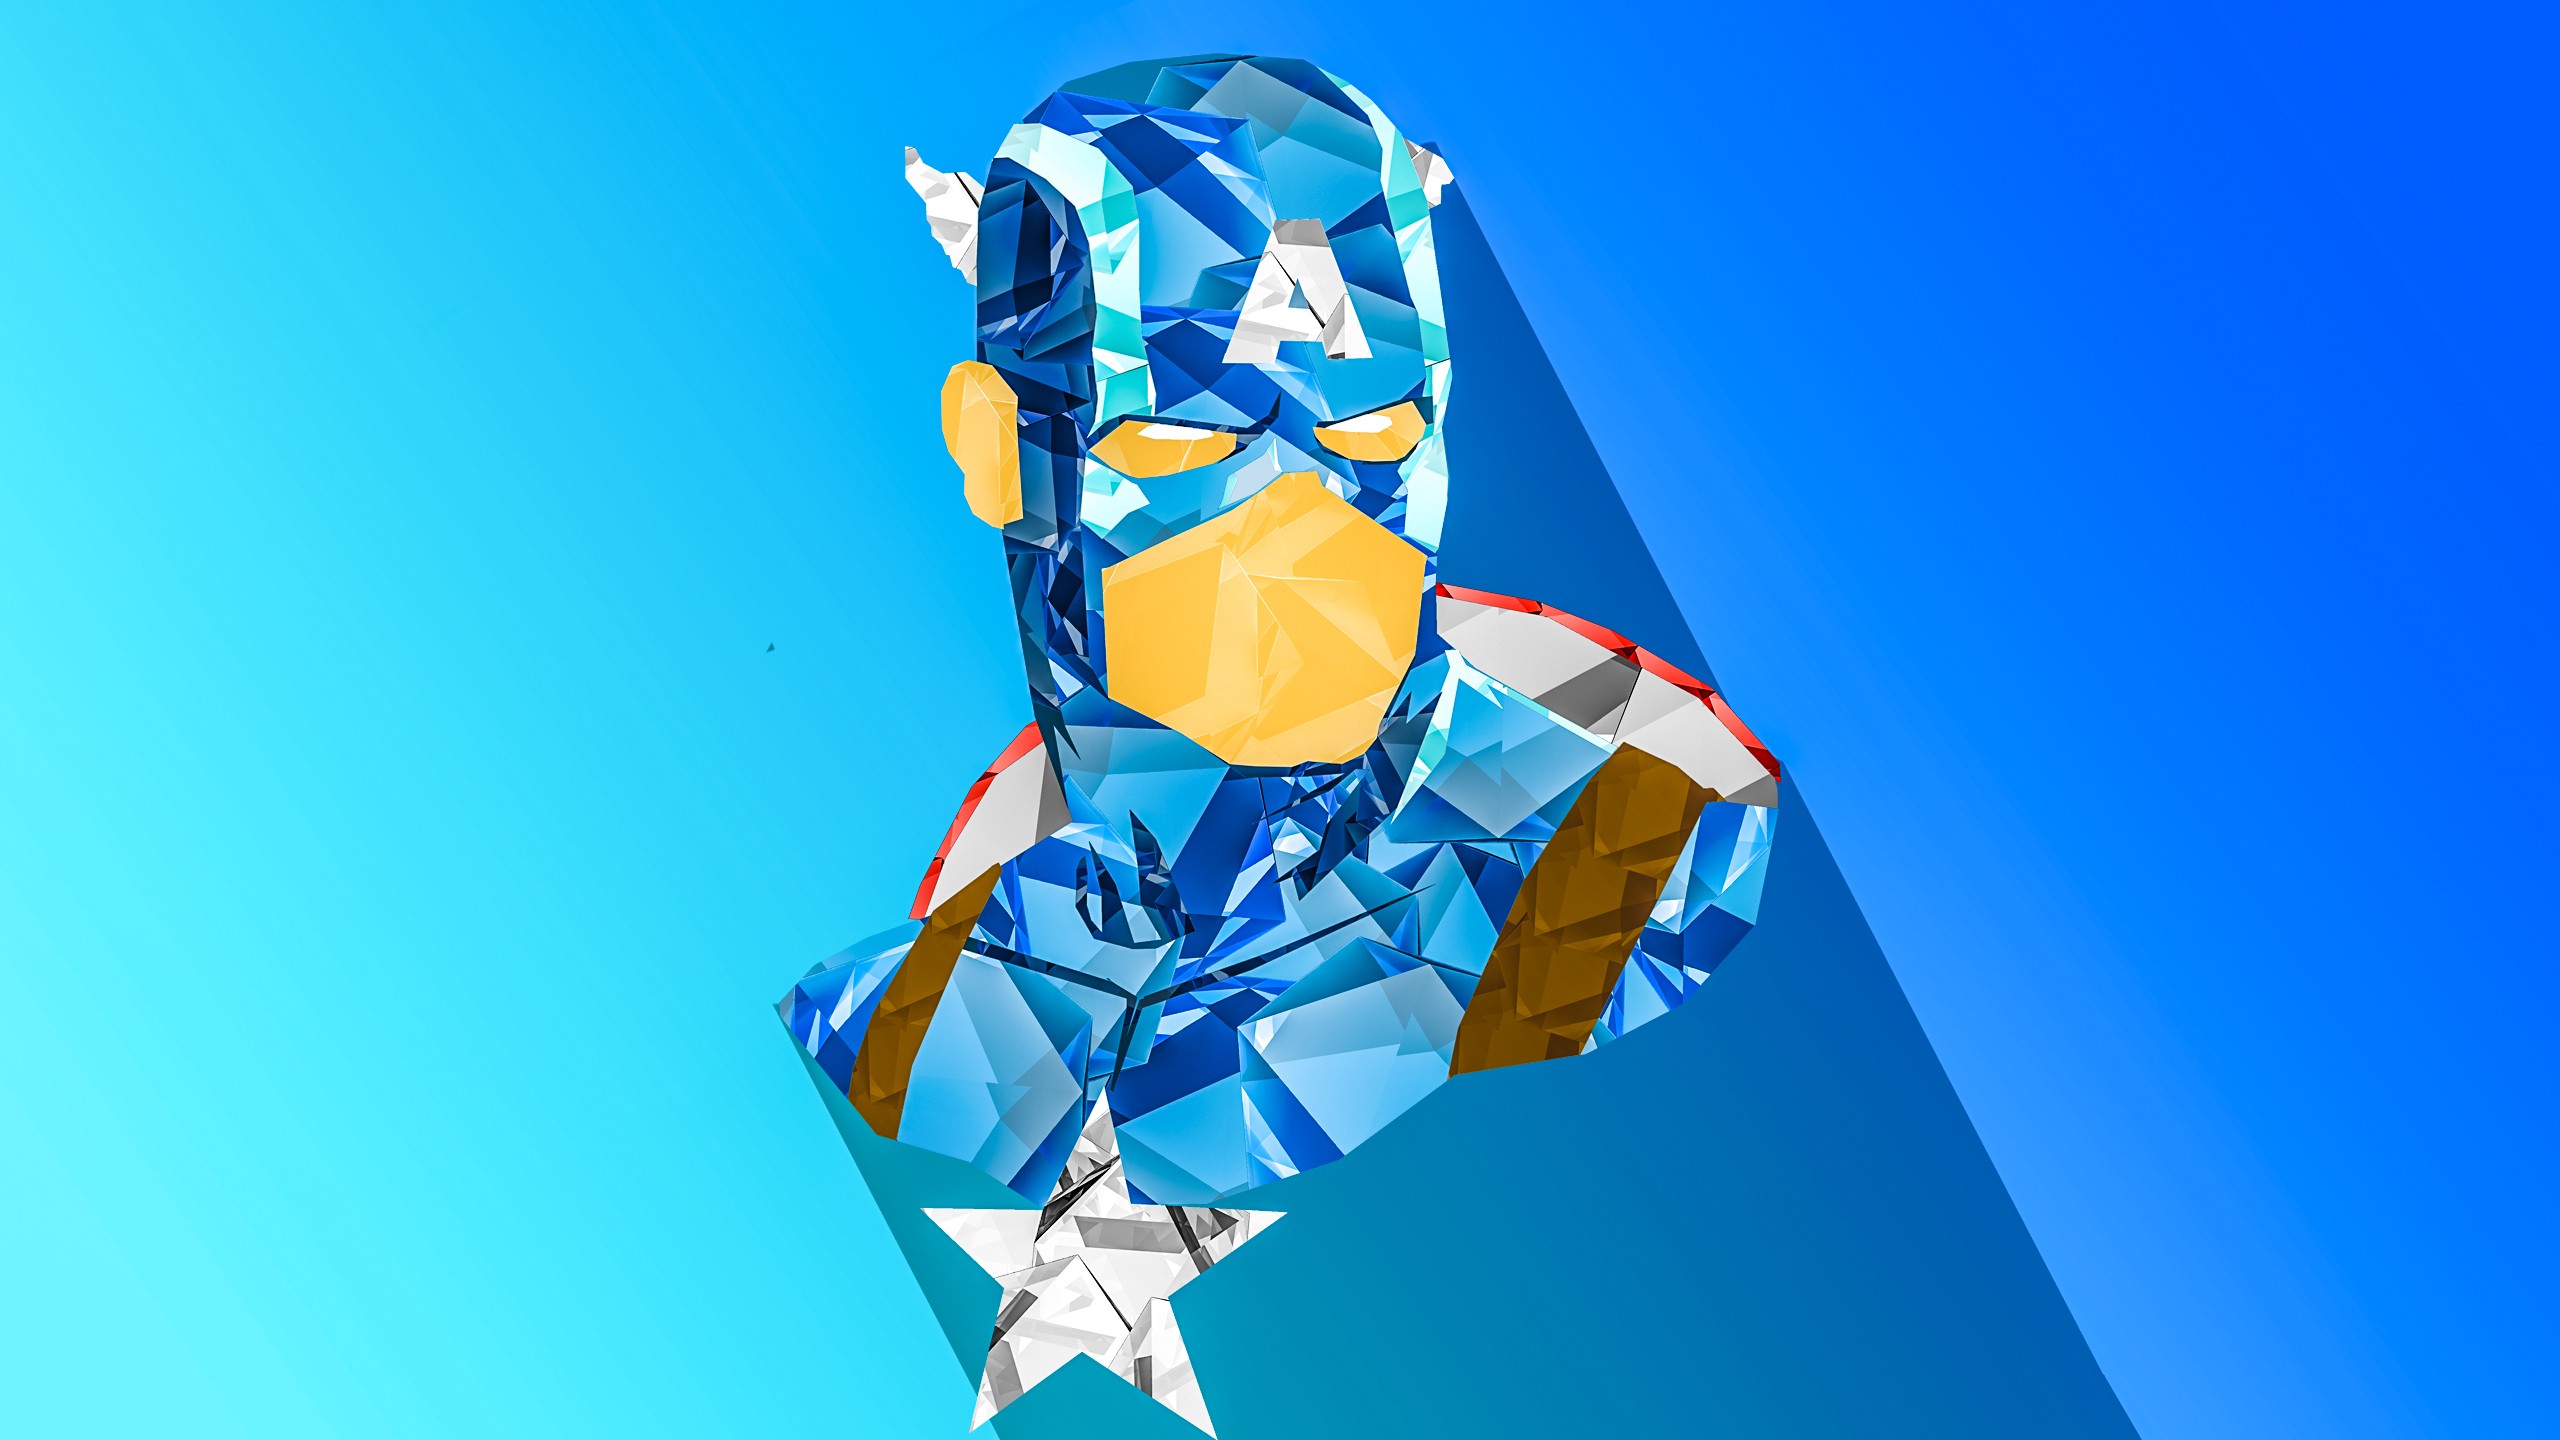 General 2560x1440 Captain America digital art low poly cyan blue abstract gradient simple background The Avengers